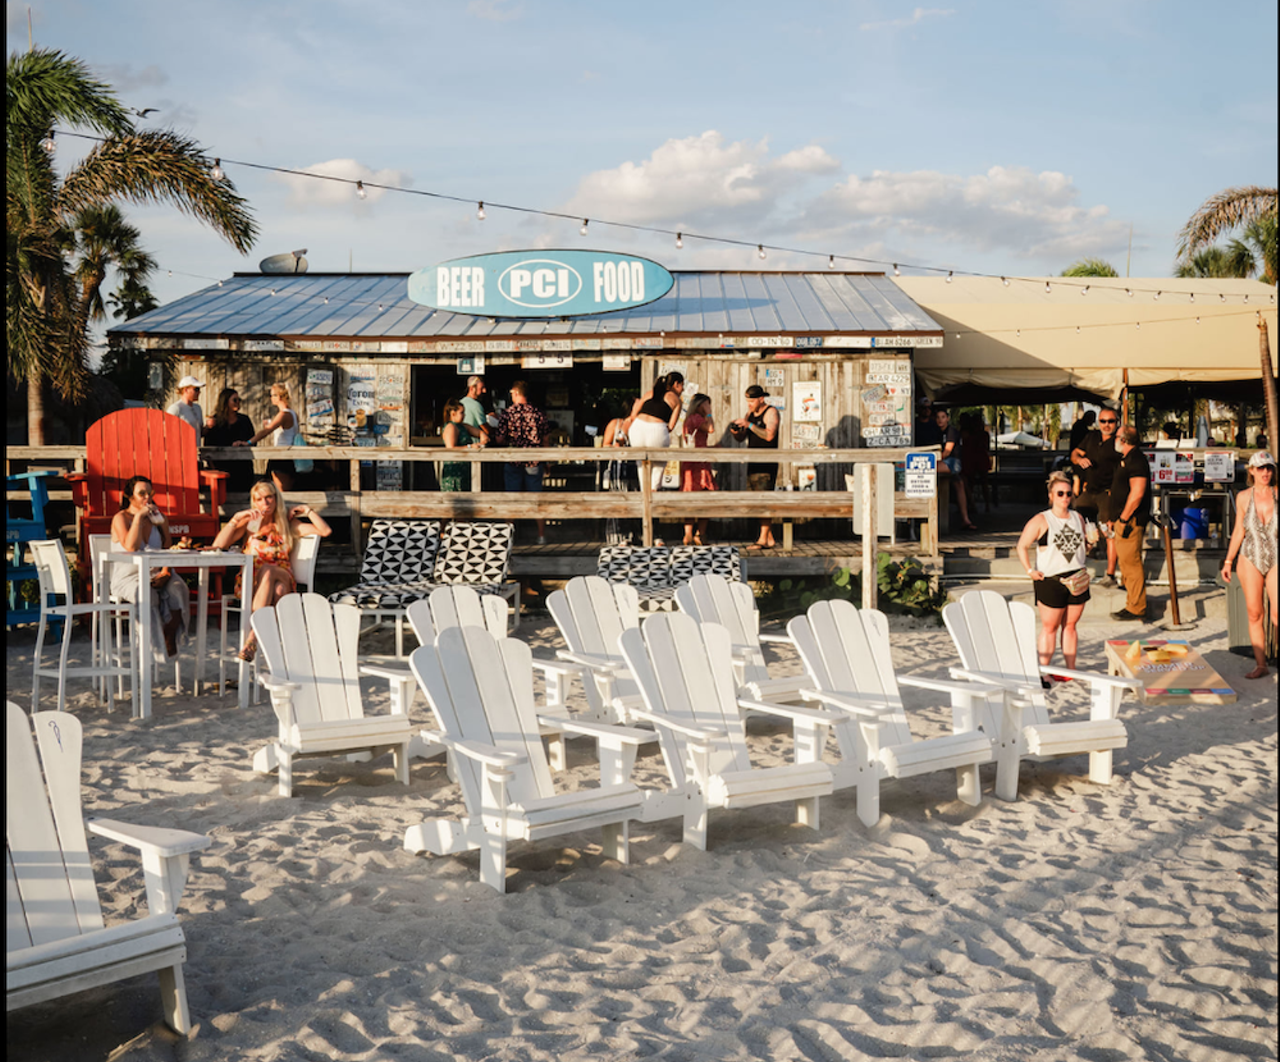 PCI Beach Bar & Snack Shack
6300 Gulf Blvd., St. Pete Beach, 727-367-2711
Live on vacation mode all day long at the Beach Bar & Snack Shack that is part of the Postcard Inn in St. Pete Beach. The restaurant offers a variety of tasty options with poolside service and a solid drink selection.
Photo via Postcard Inn on the Beach/Facebook